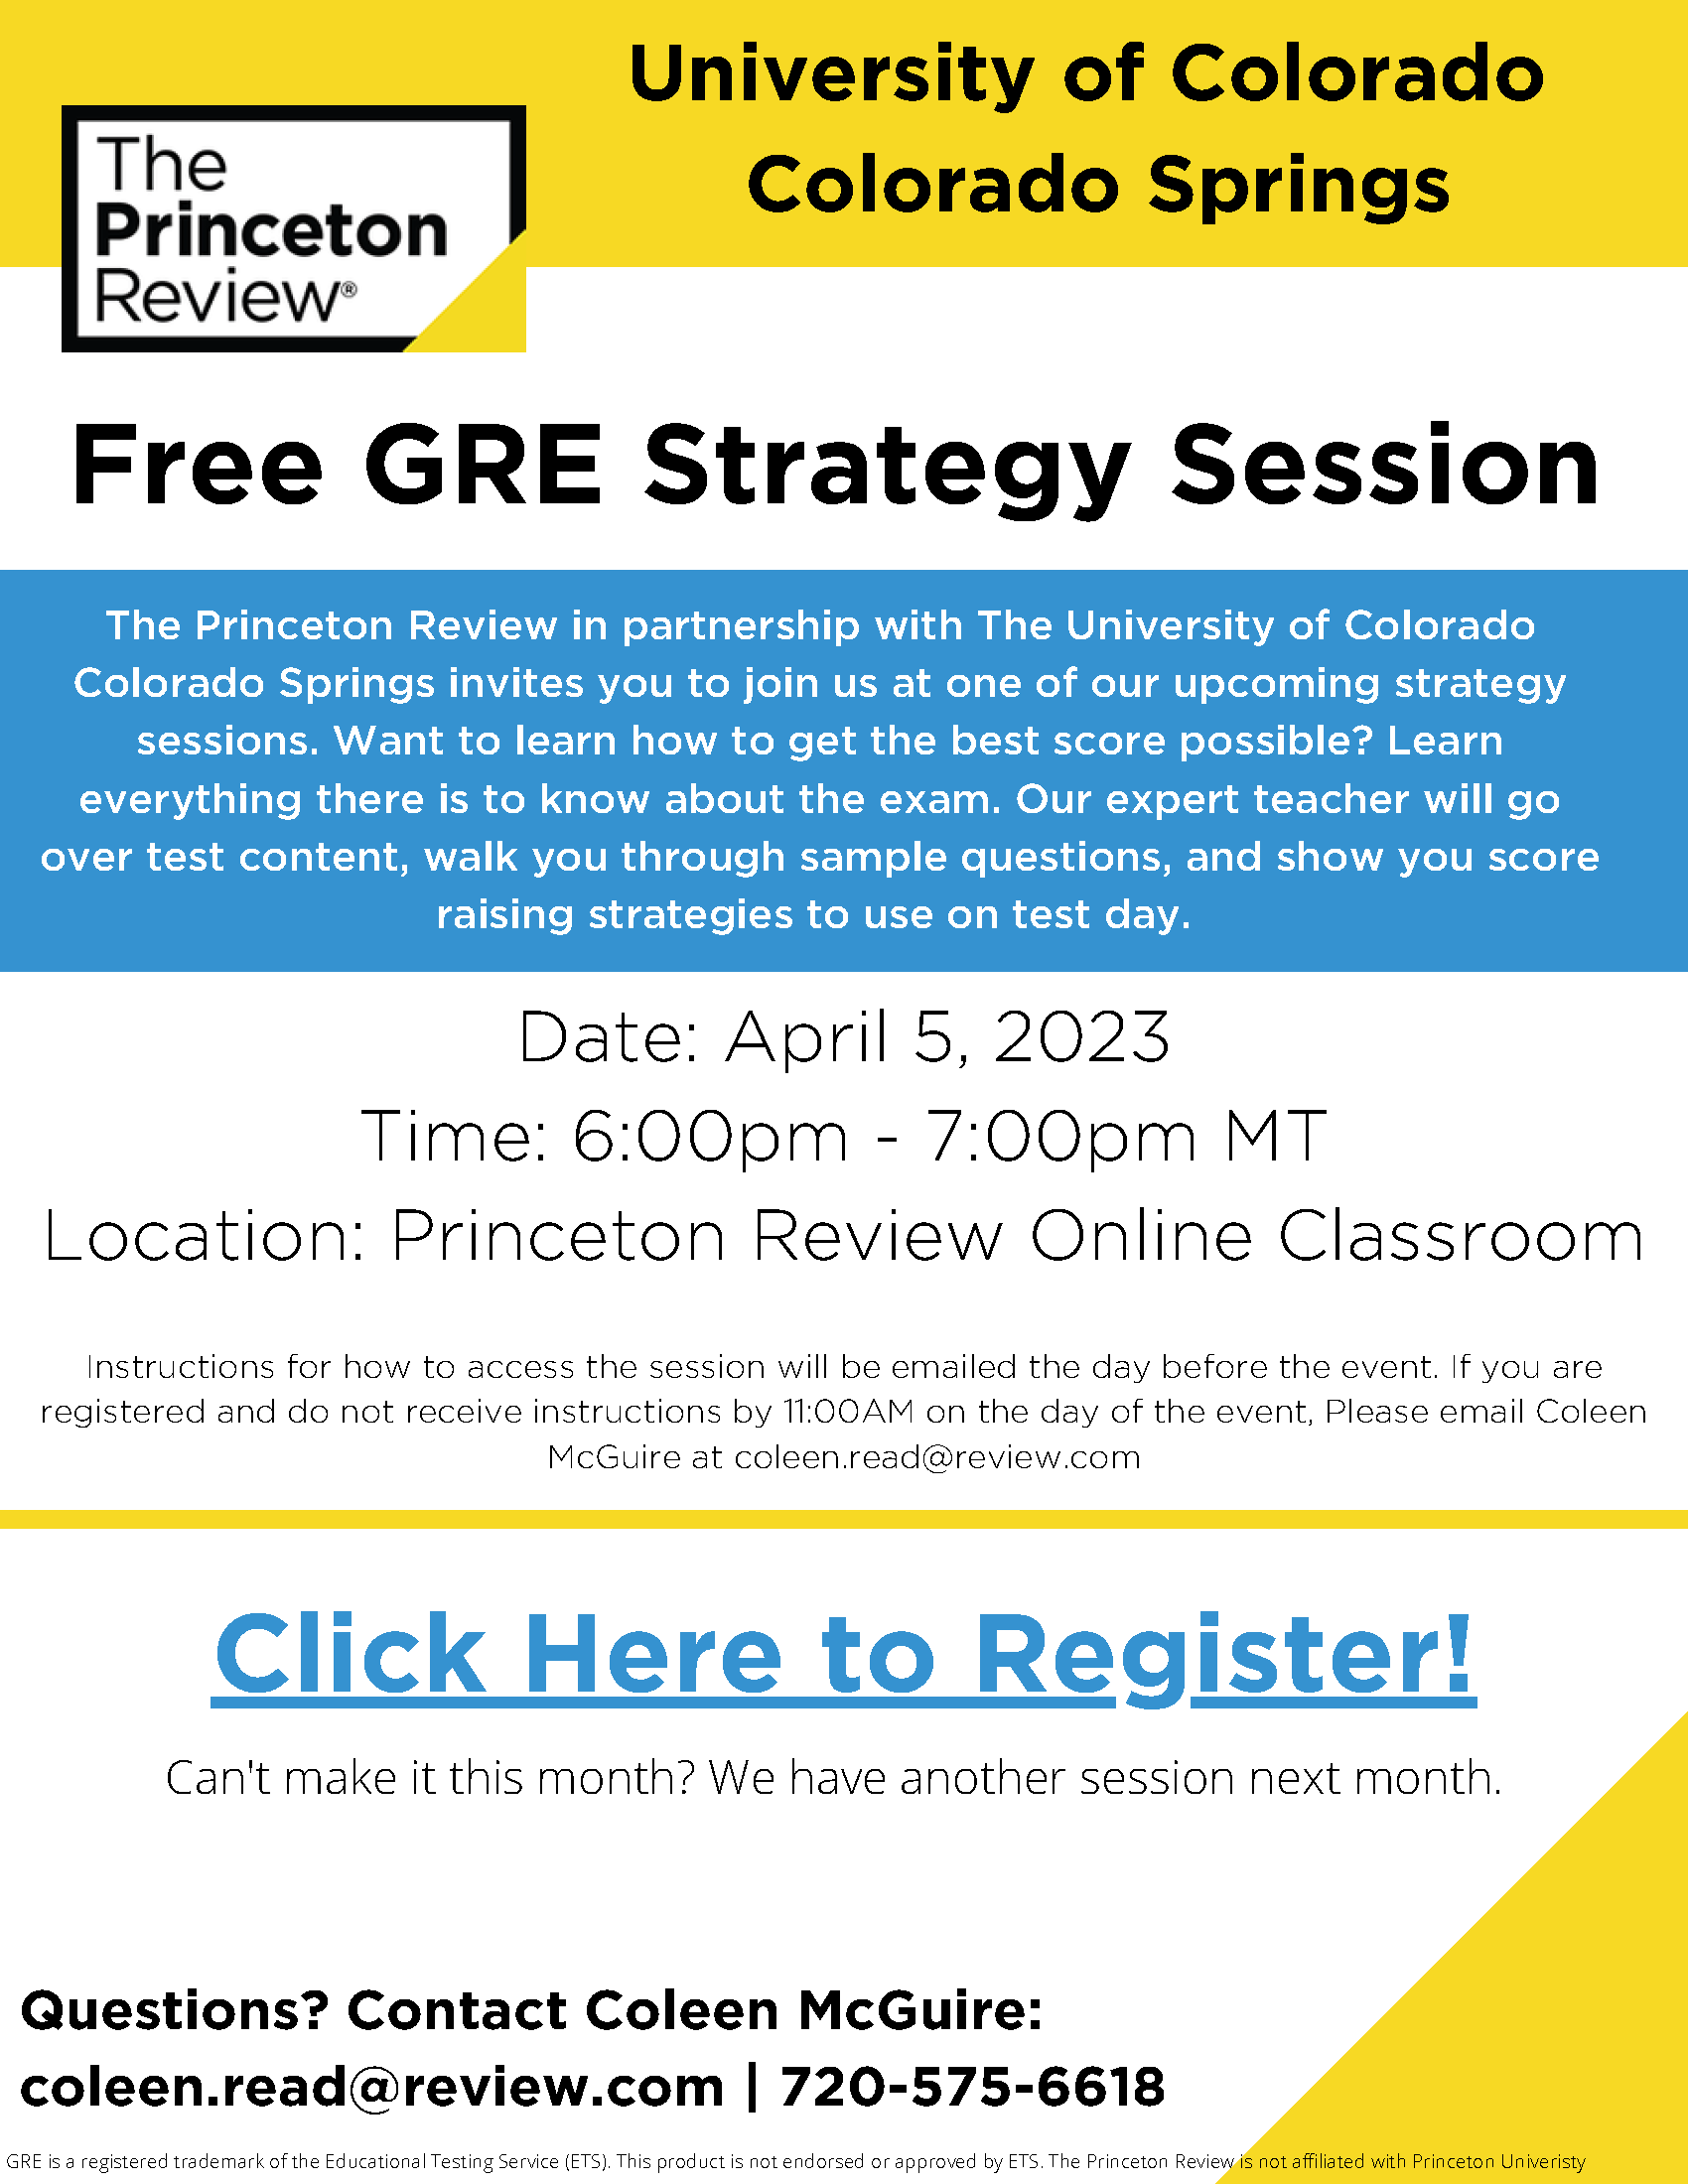 GRE Strategy Session